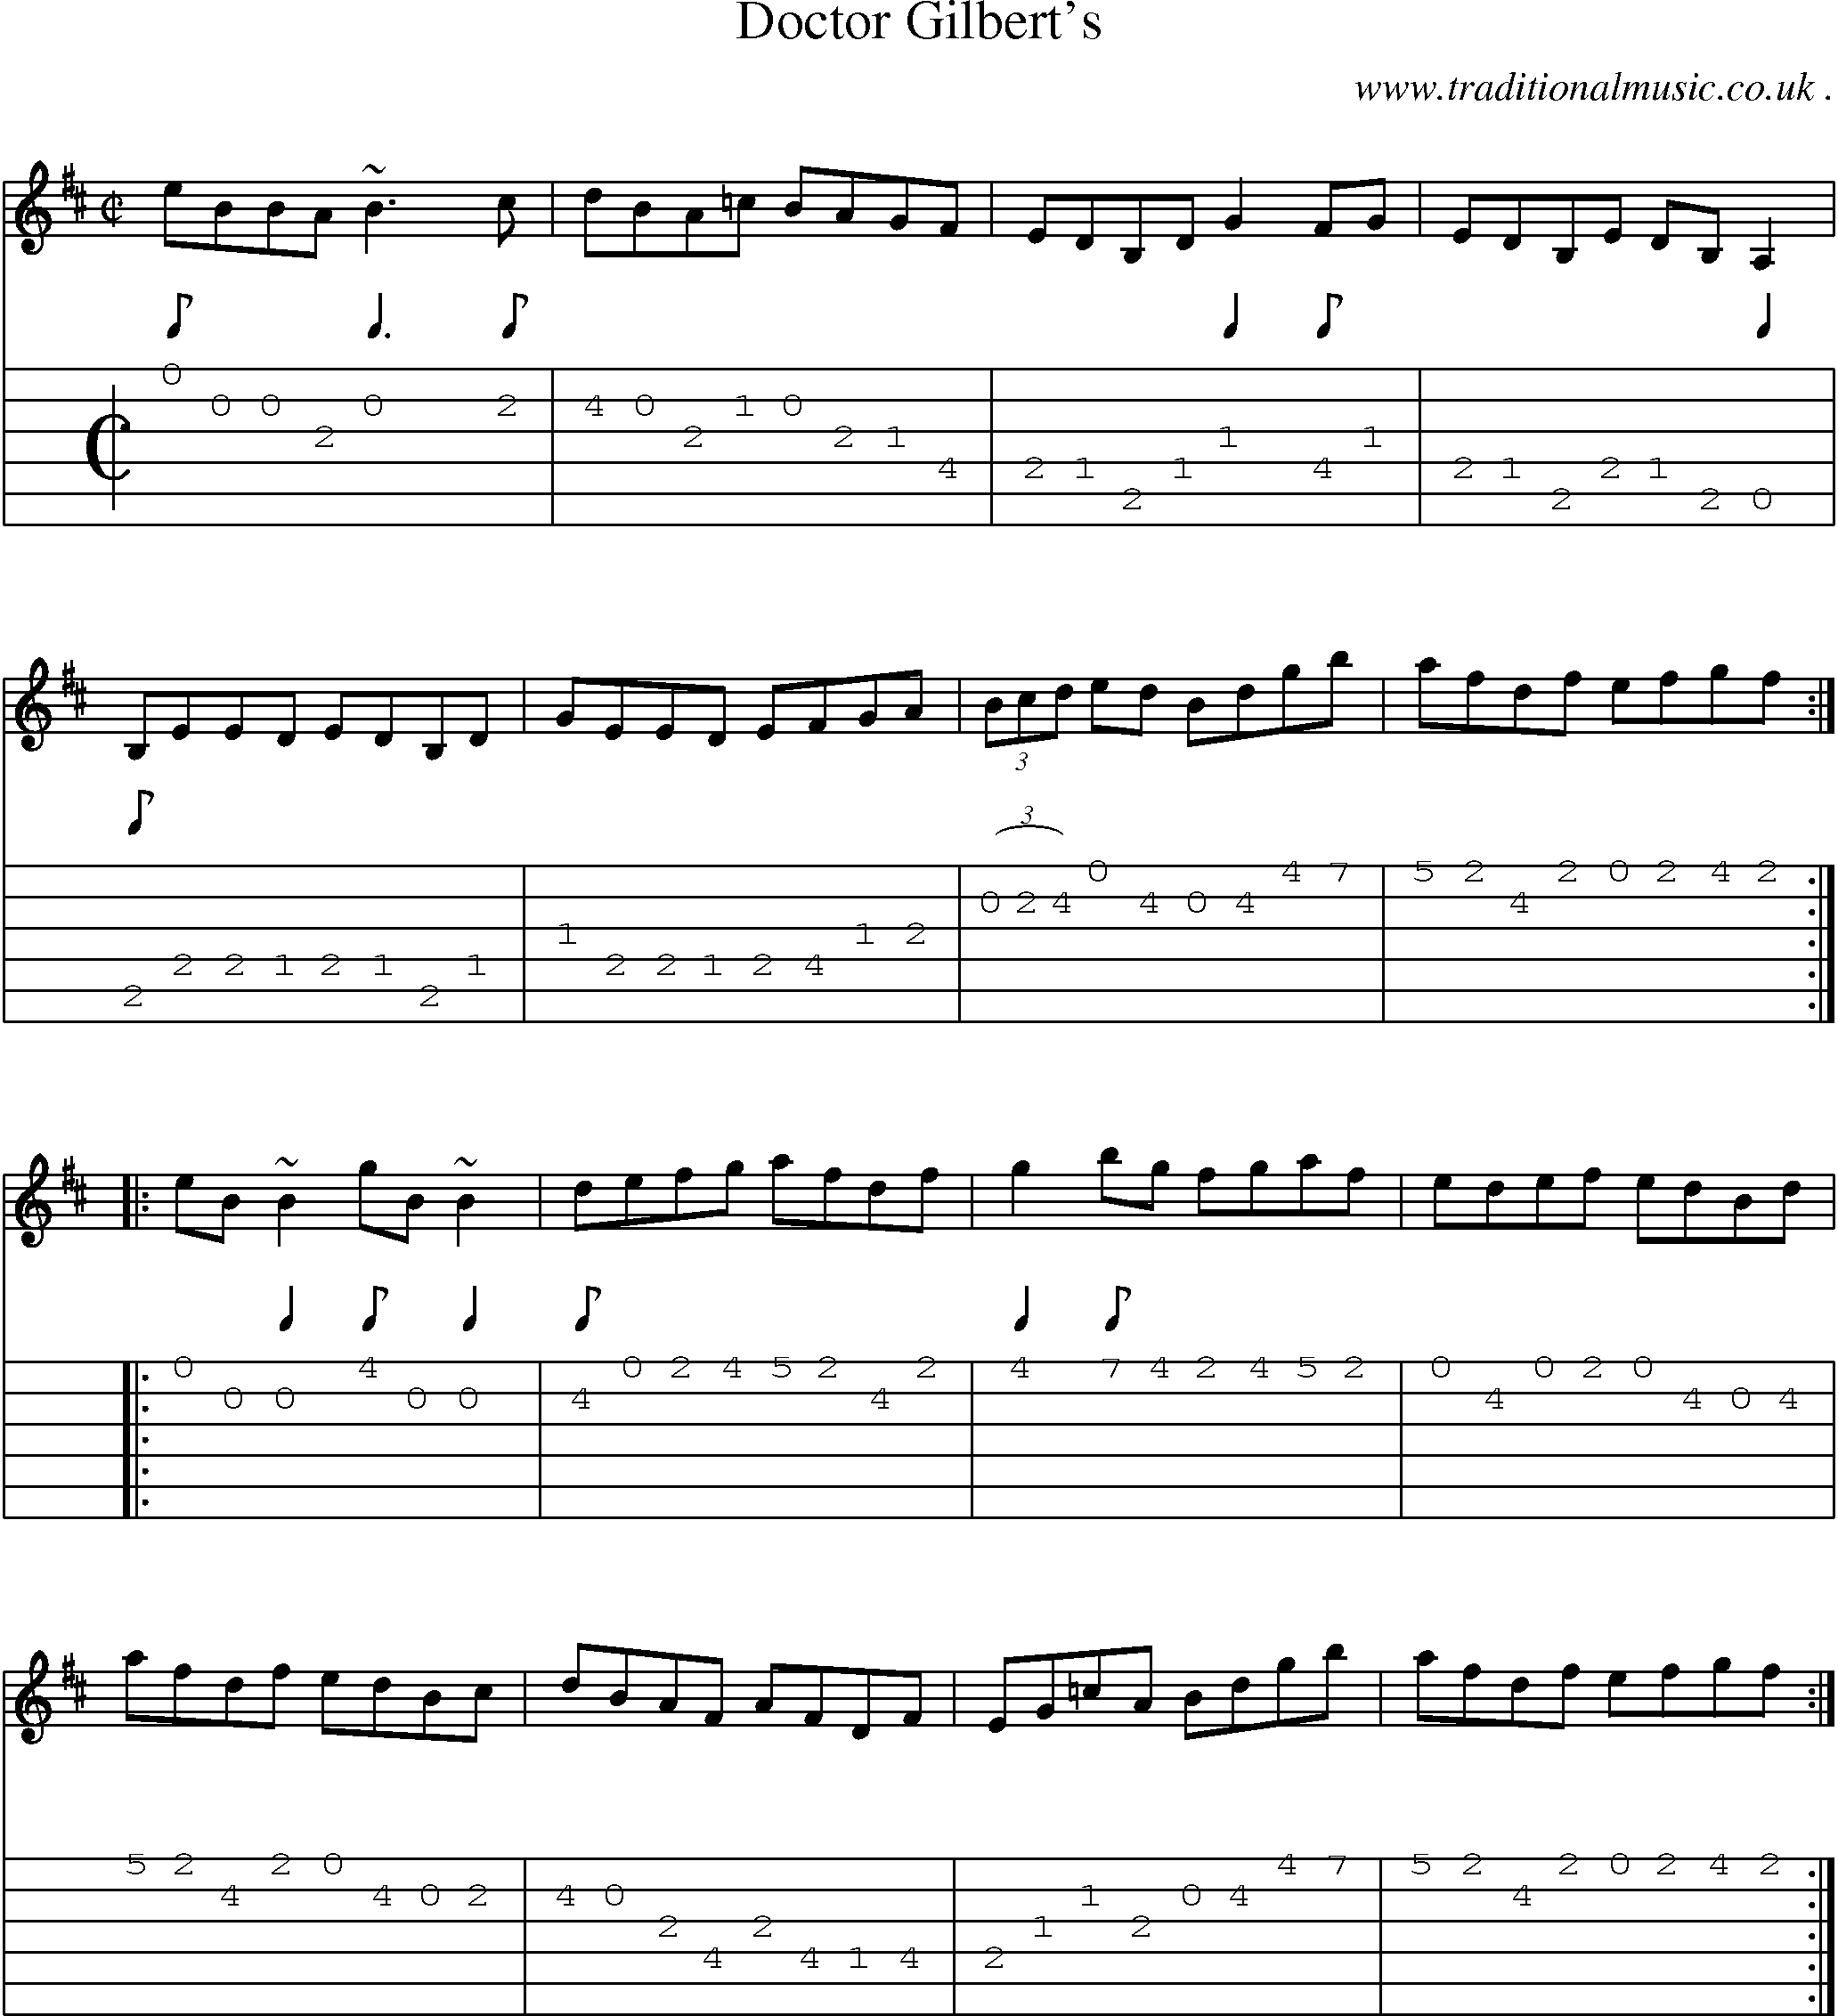 Sheet-music  score, Chords and Guitar Tabs for Doctor Gilberts